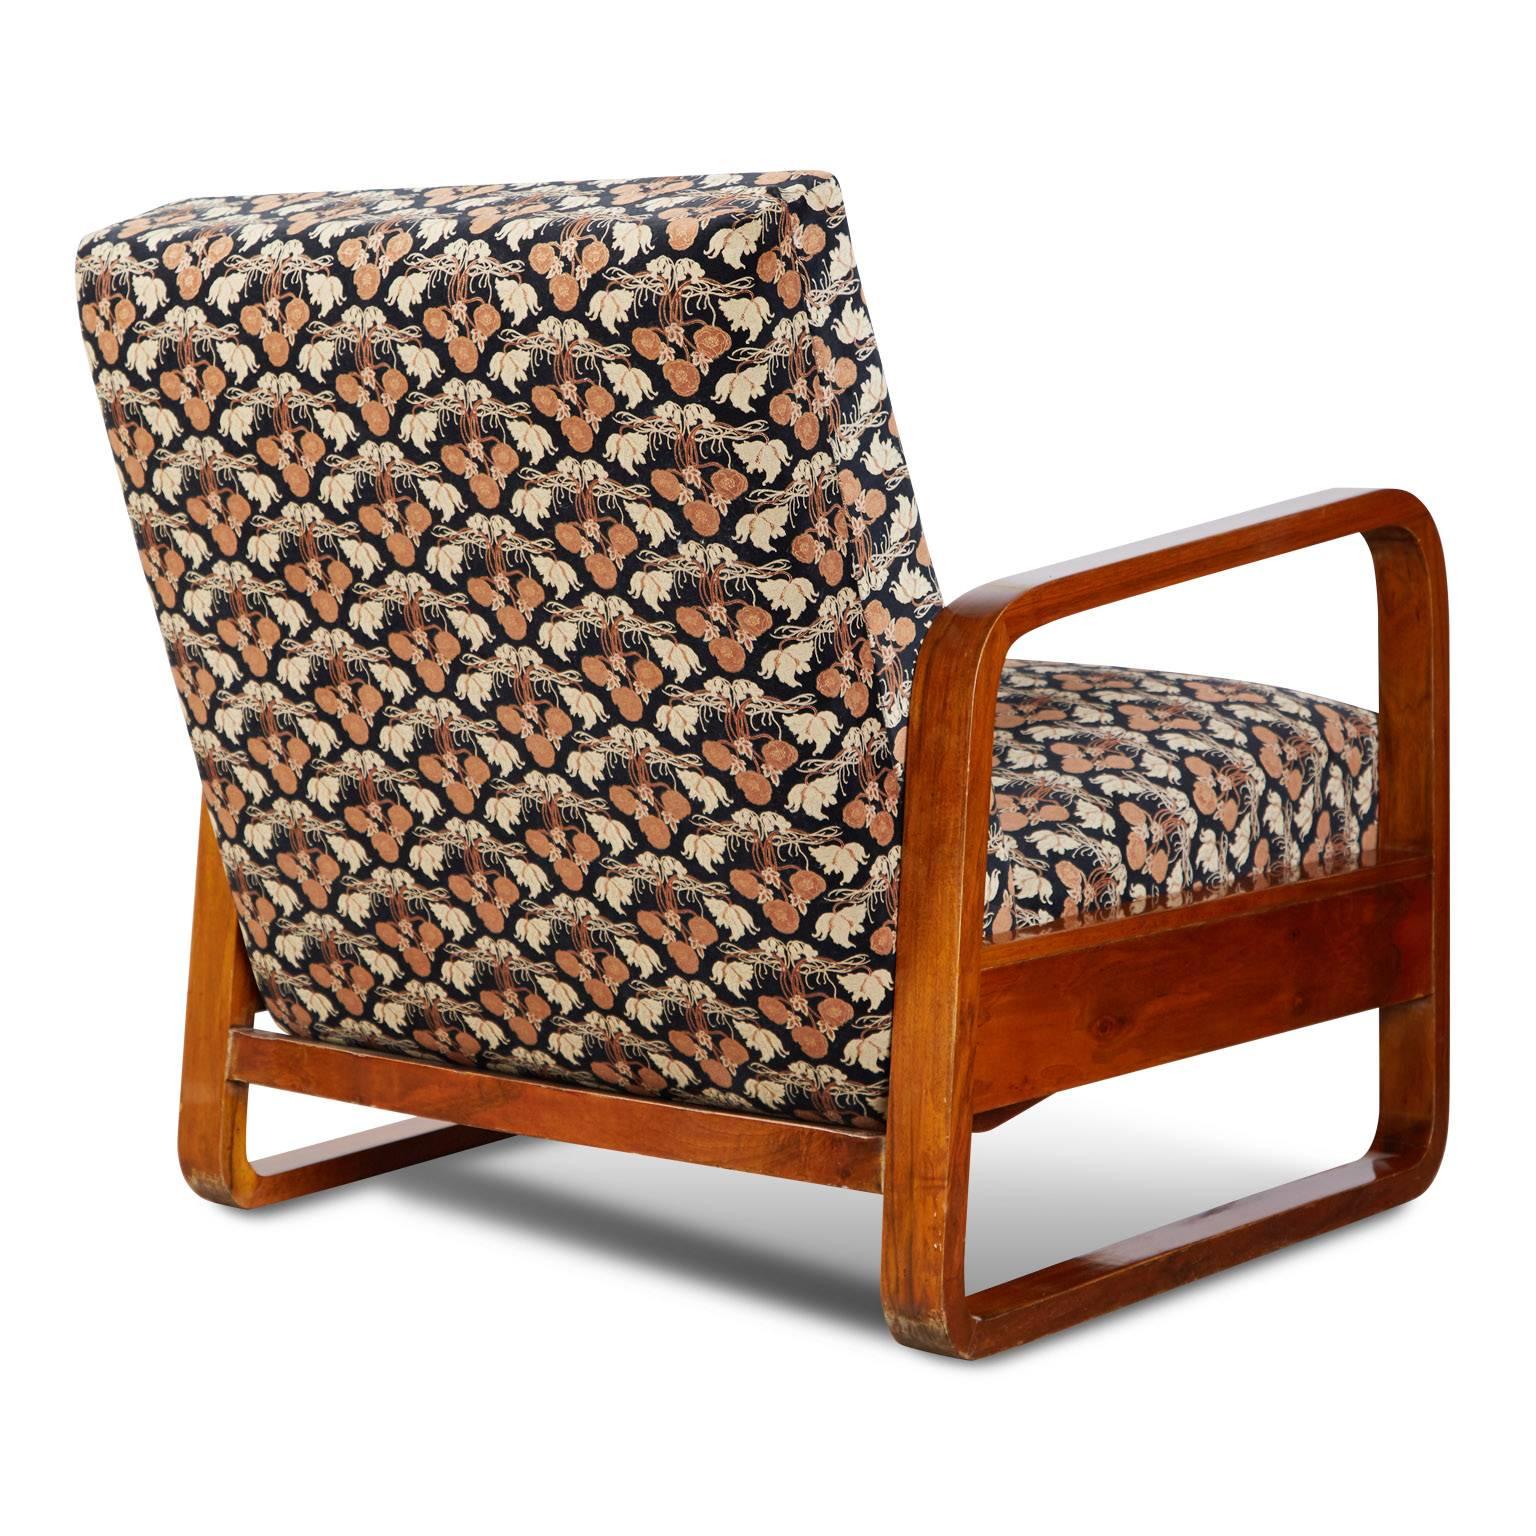 American Art Deco Sleeper Armchair with Fabric Attributed to William Morris, circa 1920